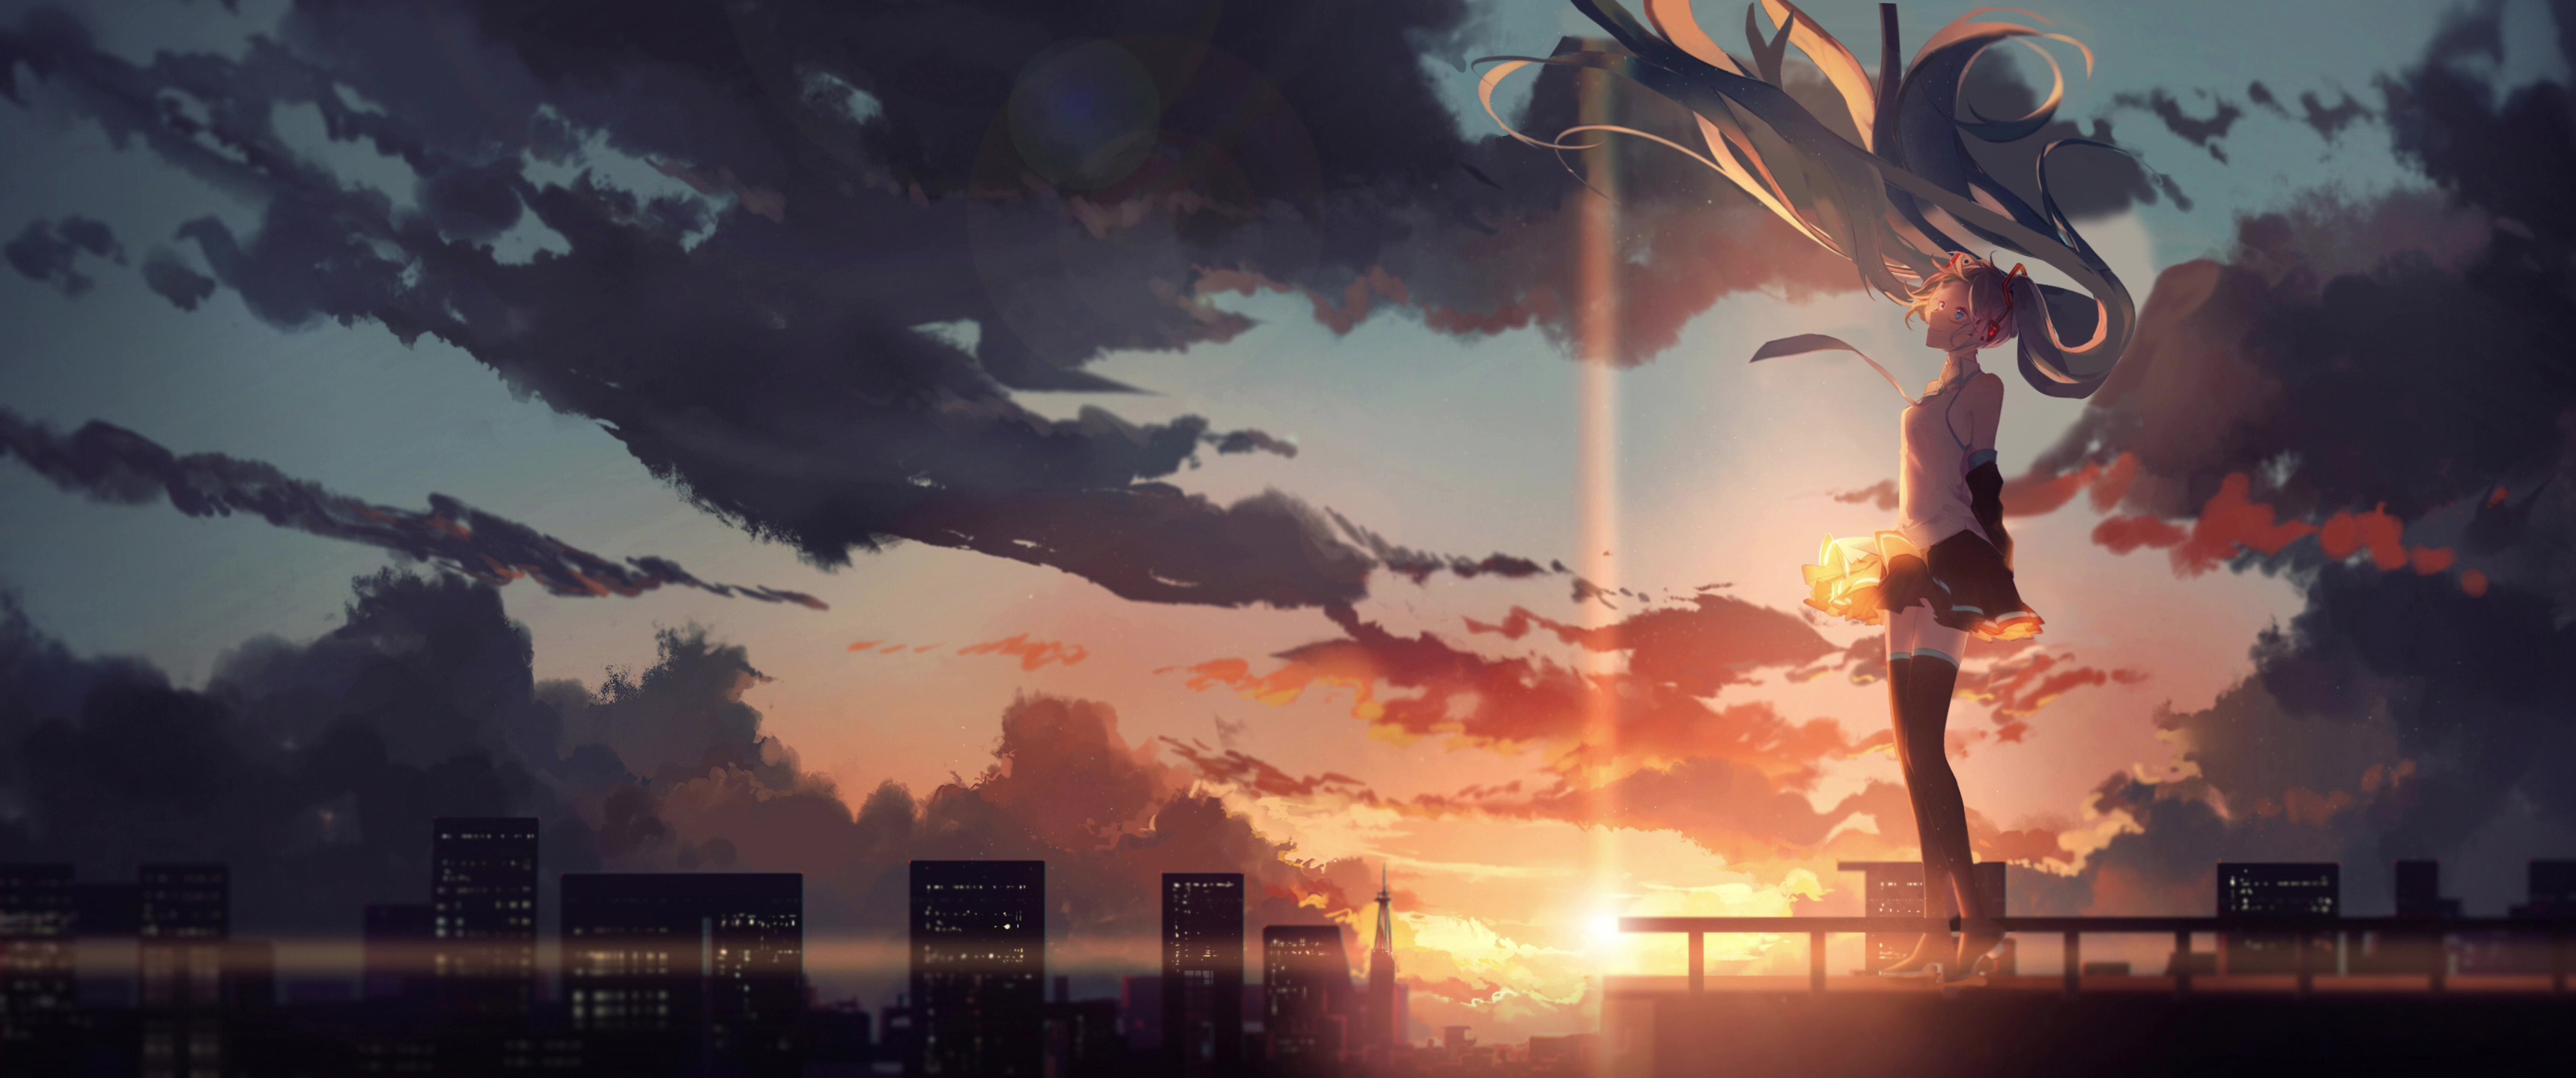 Hatsune Miku In The Sunset Live Wallpaper - HDLiveWall.com